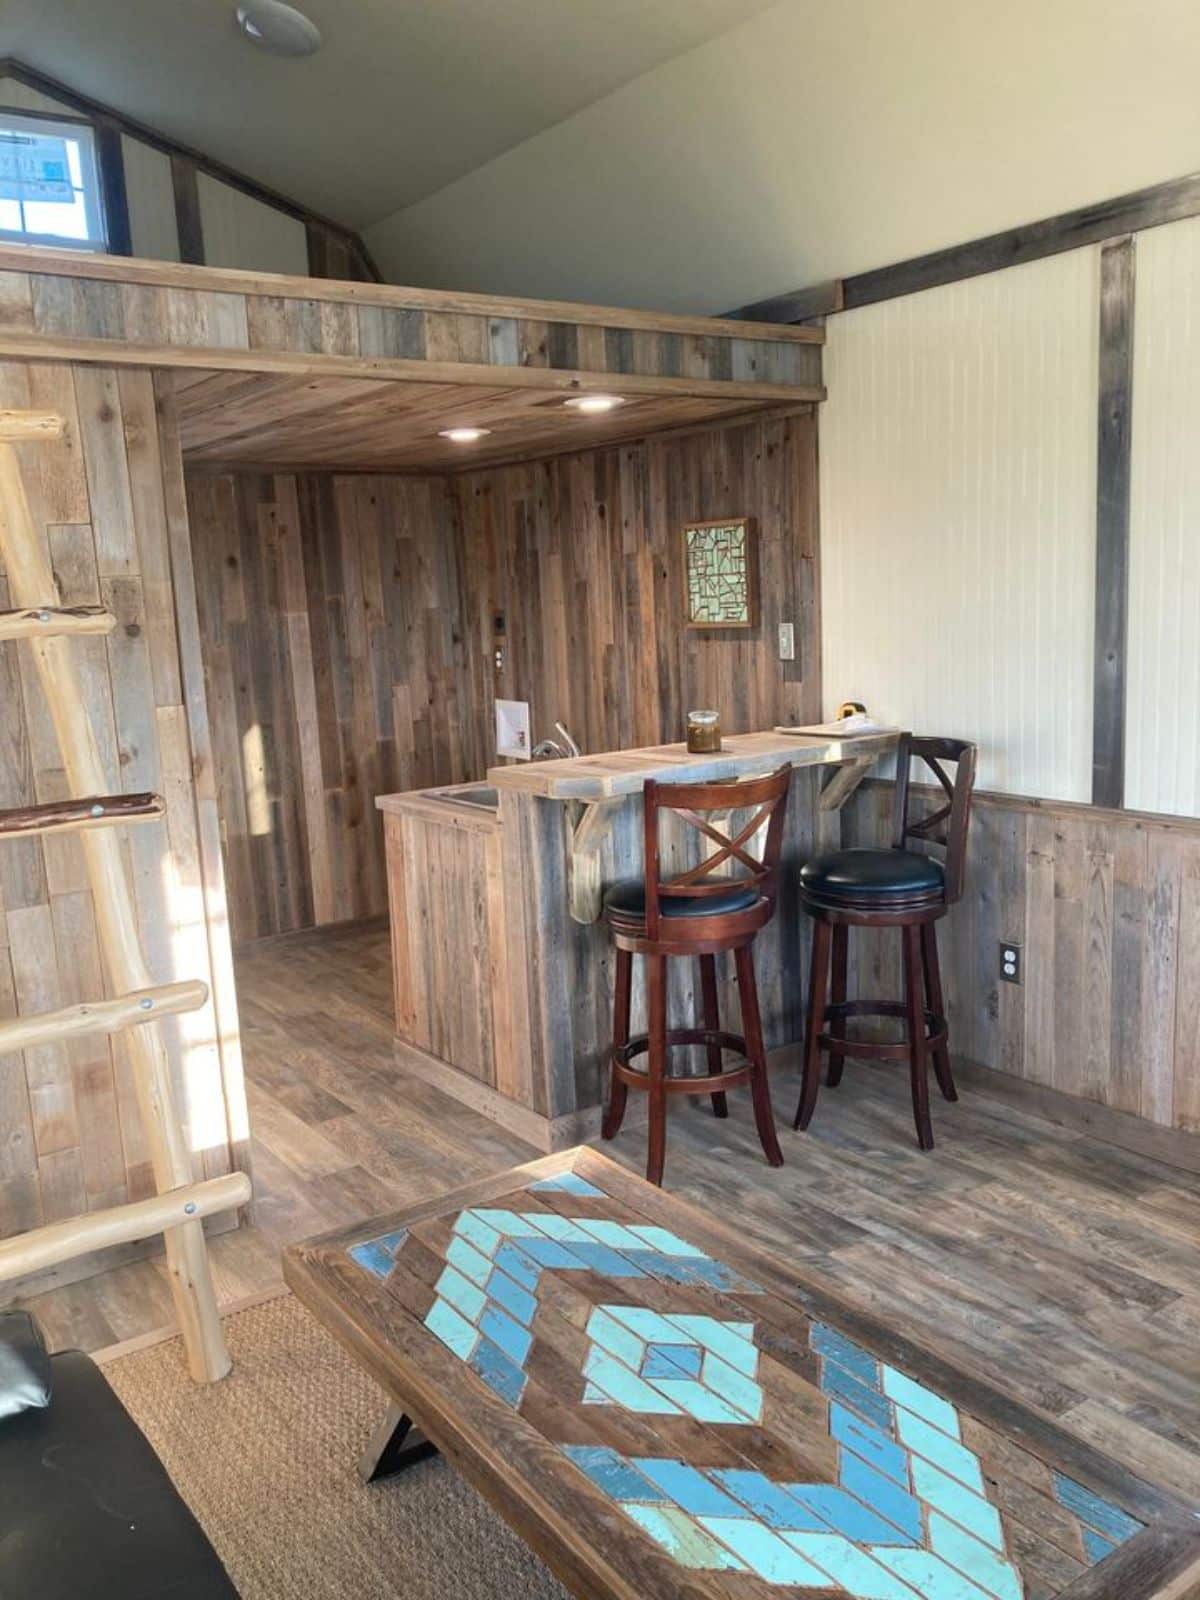 Wooden interiors of double lofted tiny home